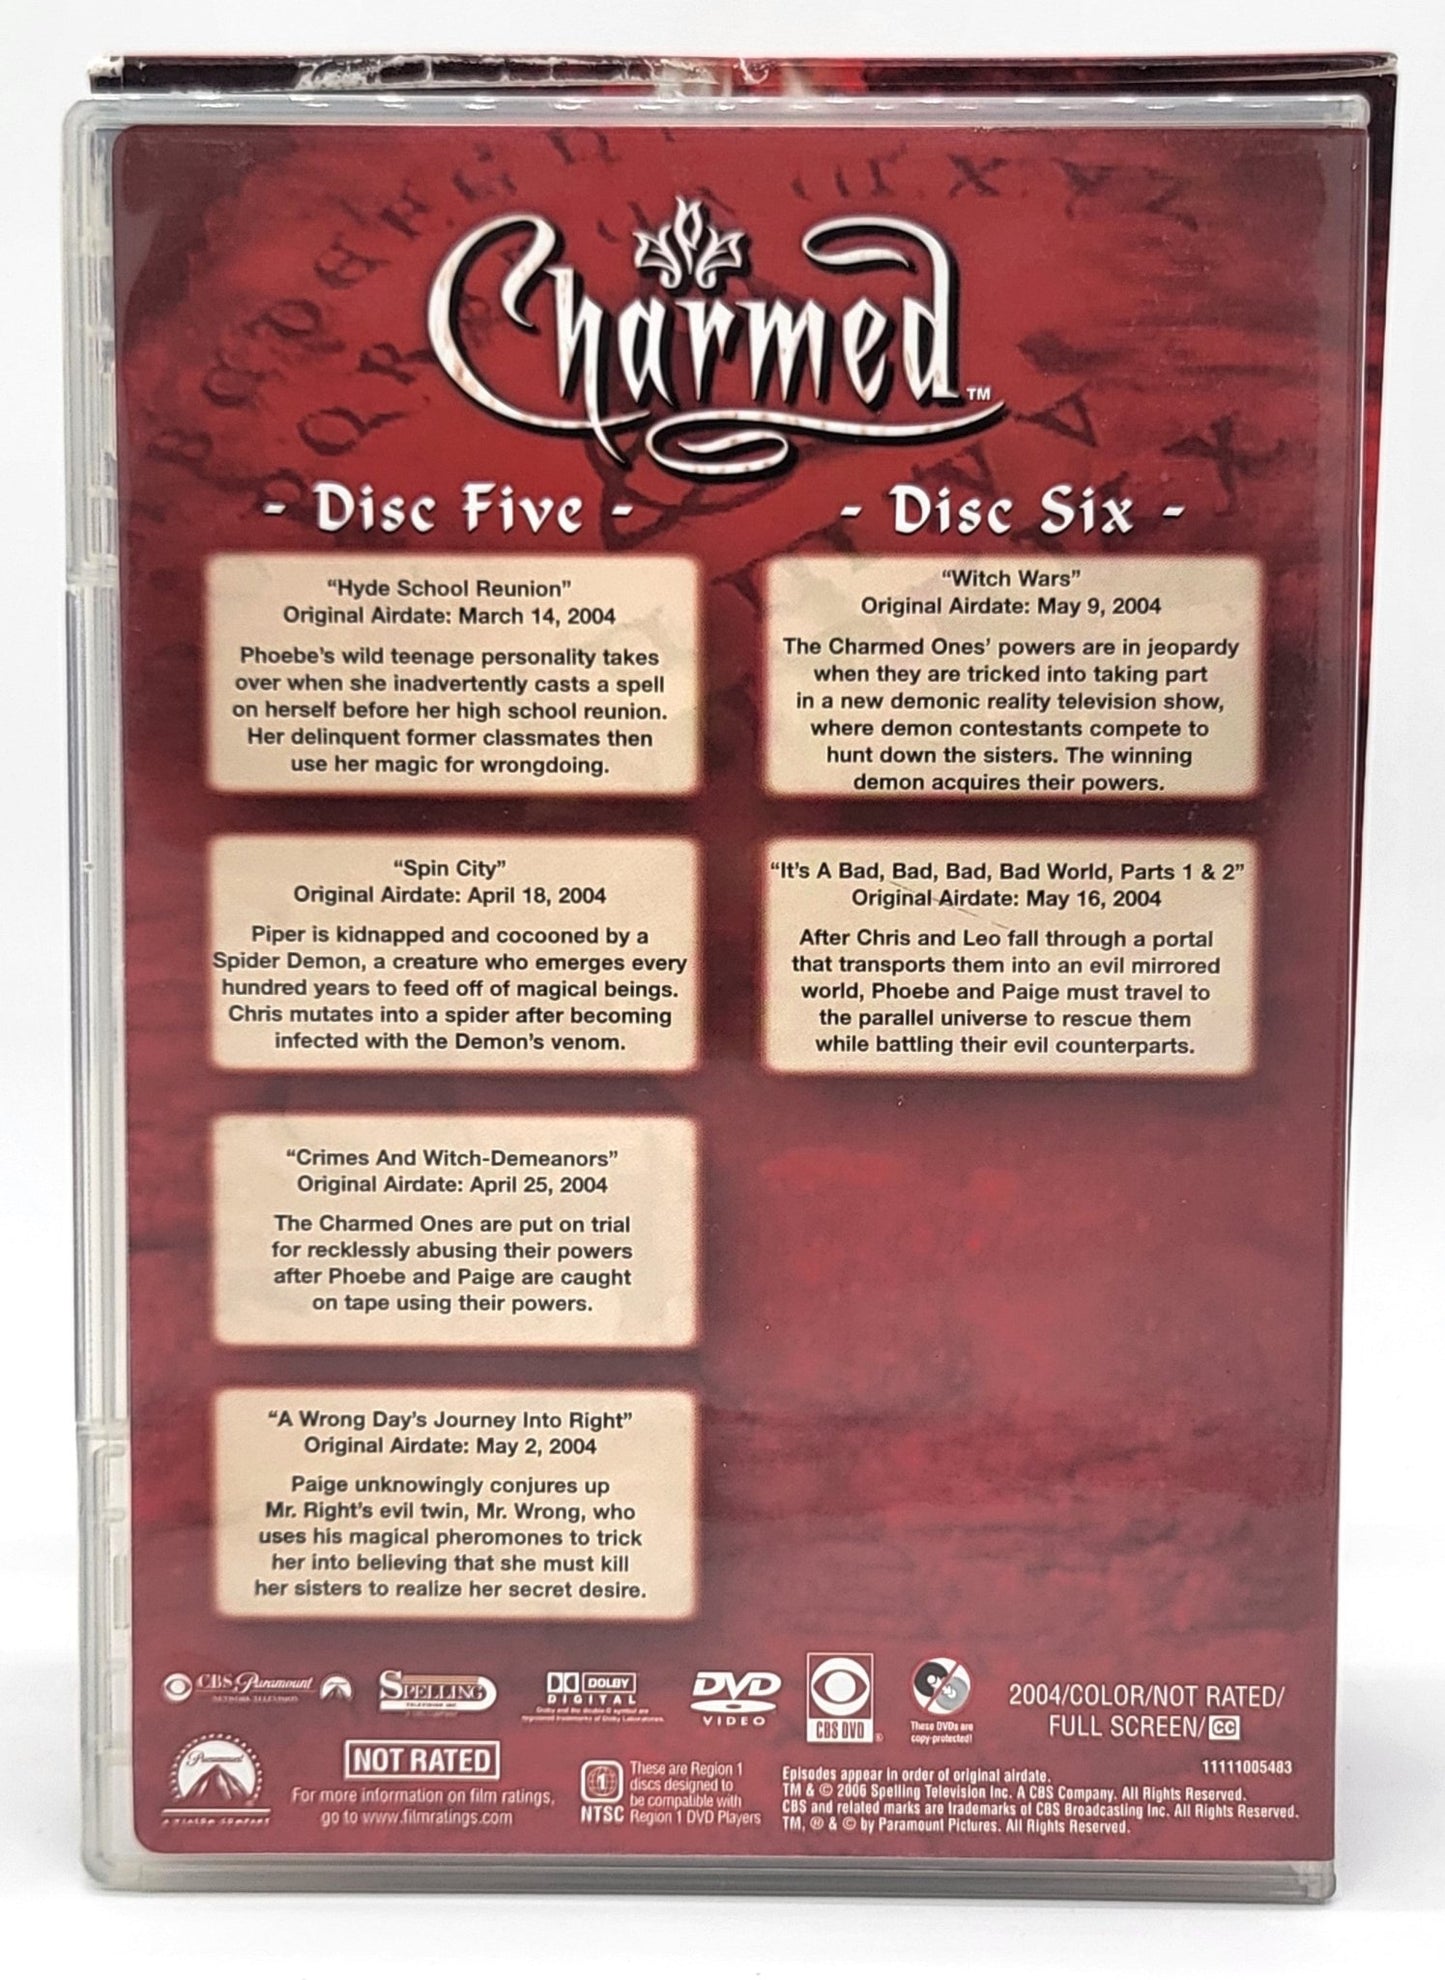 Paramount Pictures Home Entertainment - Charmed | DVD | The Complete Sixth Season - DVD - Steady Bunny Shop